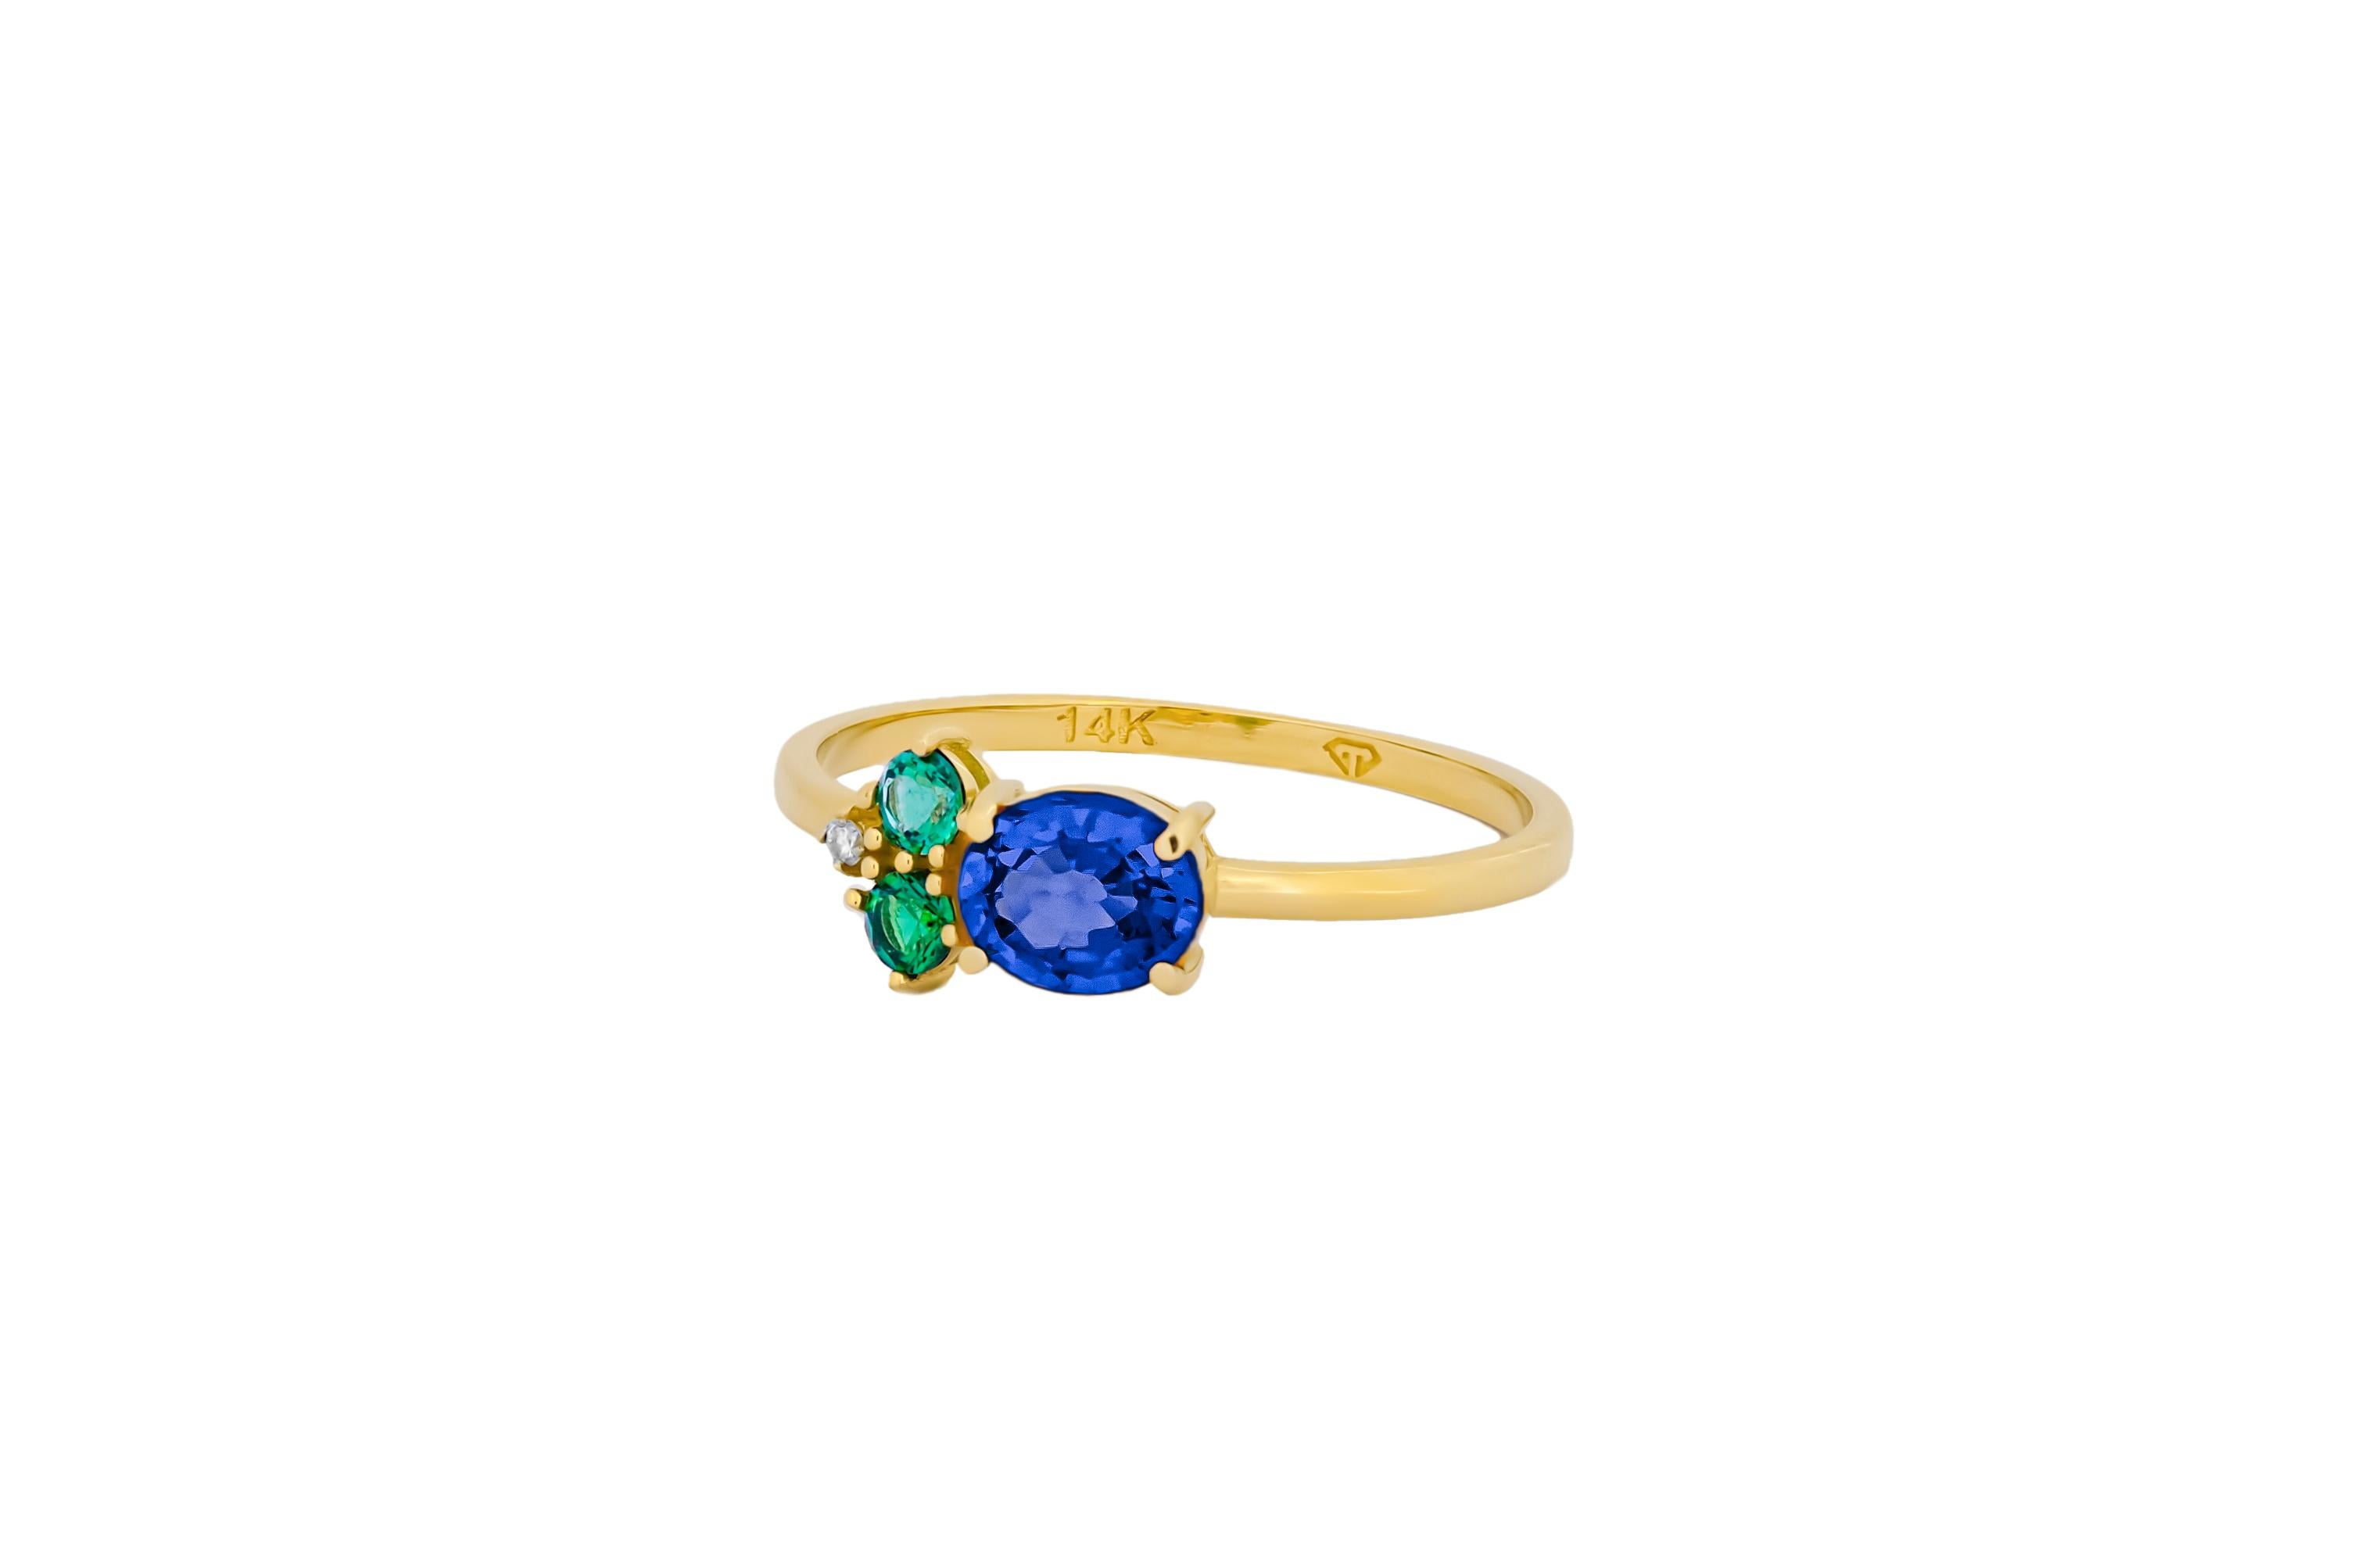 For Sale:  Oval sapphire, tsavorite and diamonds 14k gold ring. 3